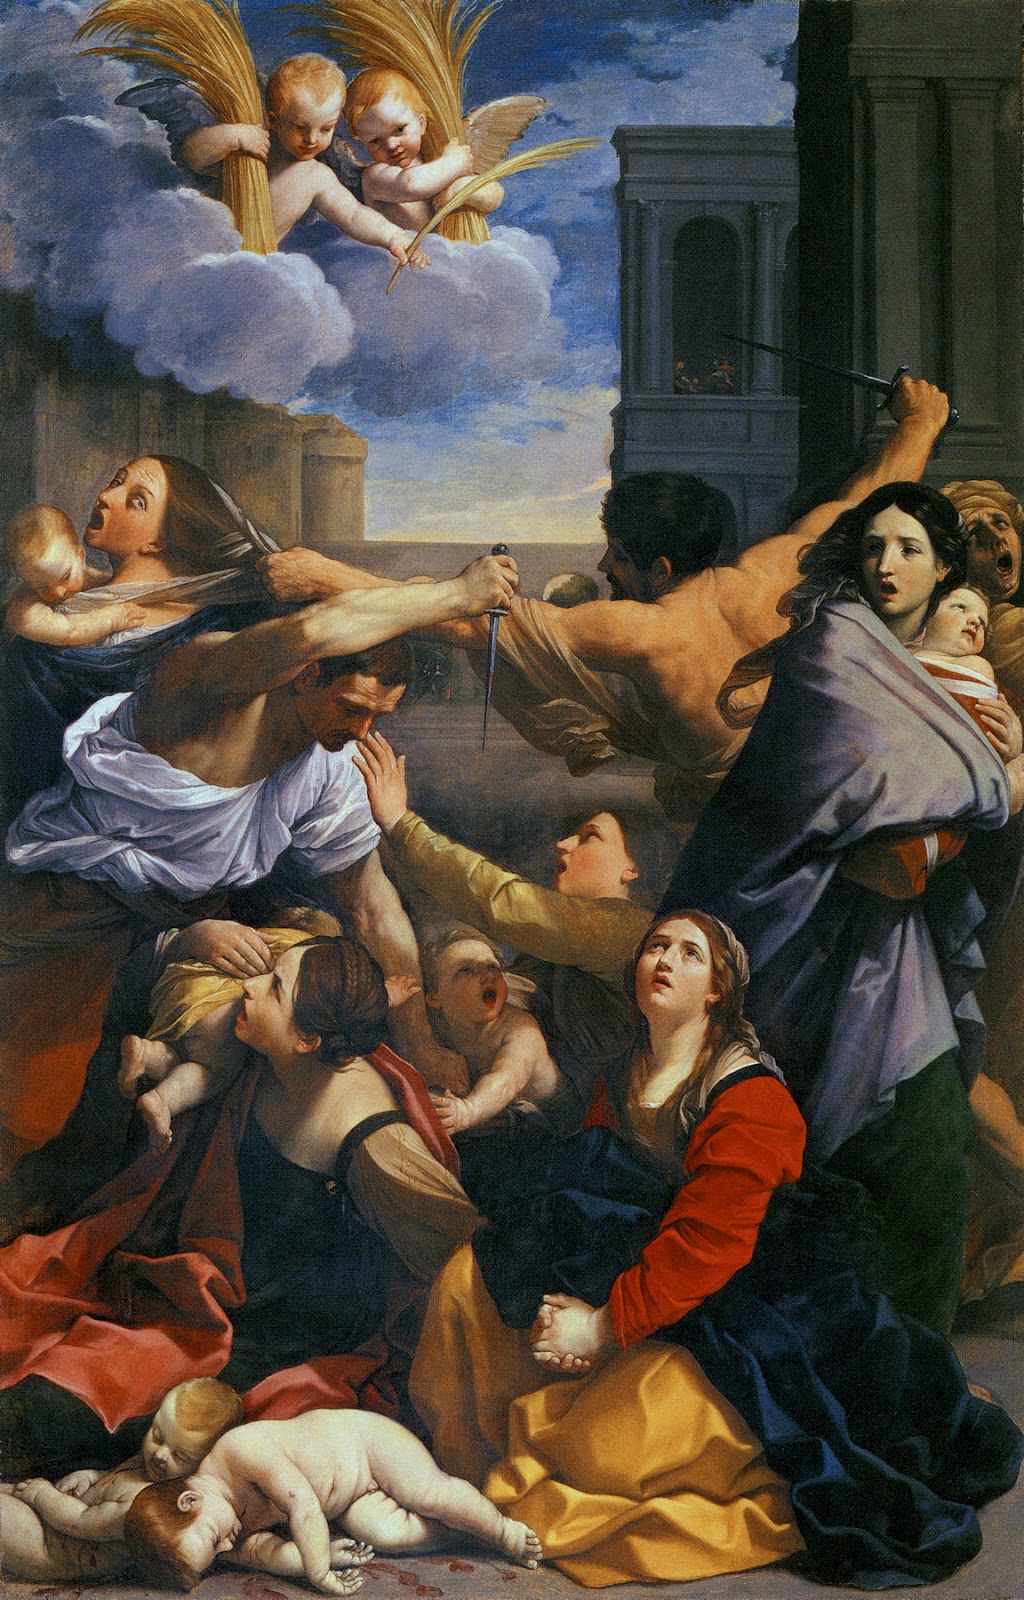 The Massacre of the Innocents by Guido Reni